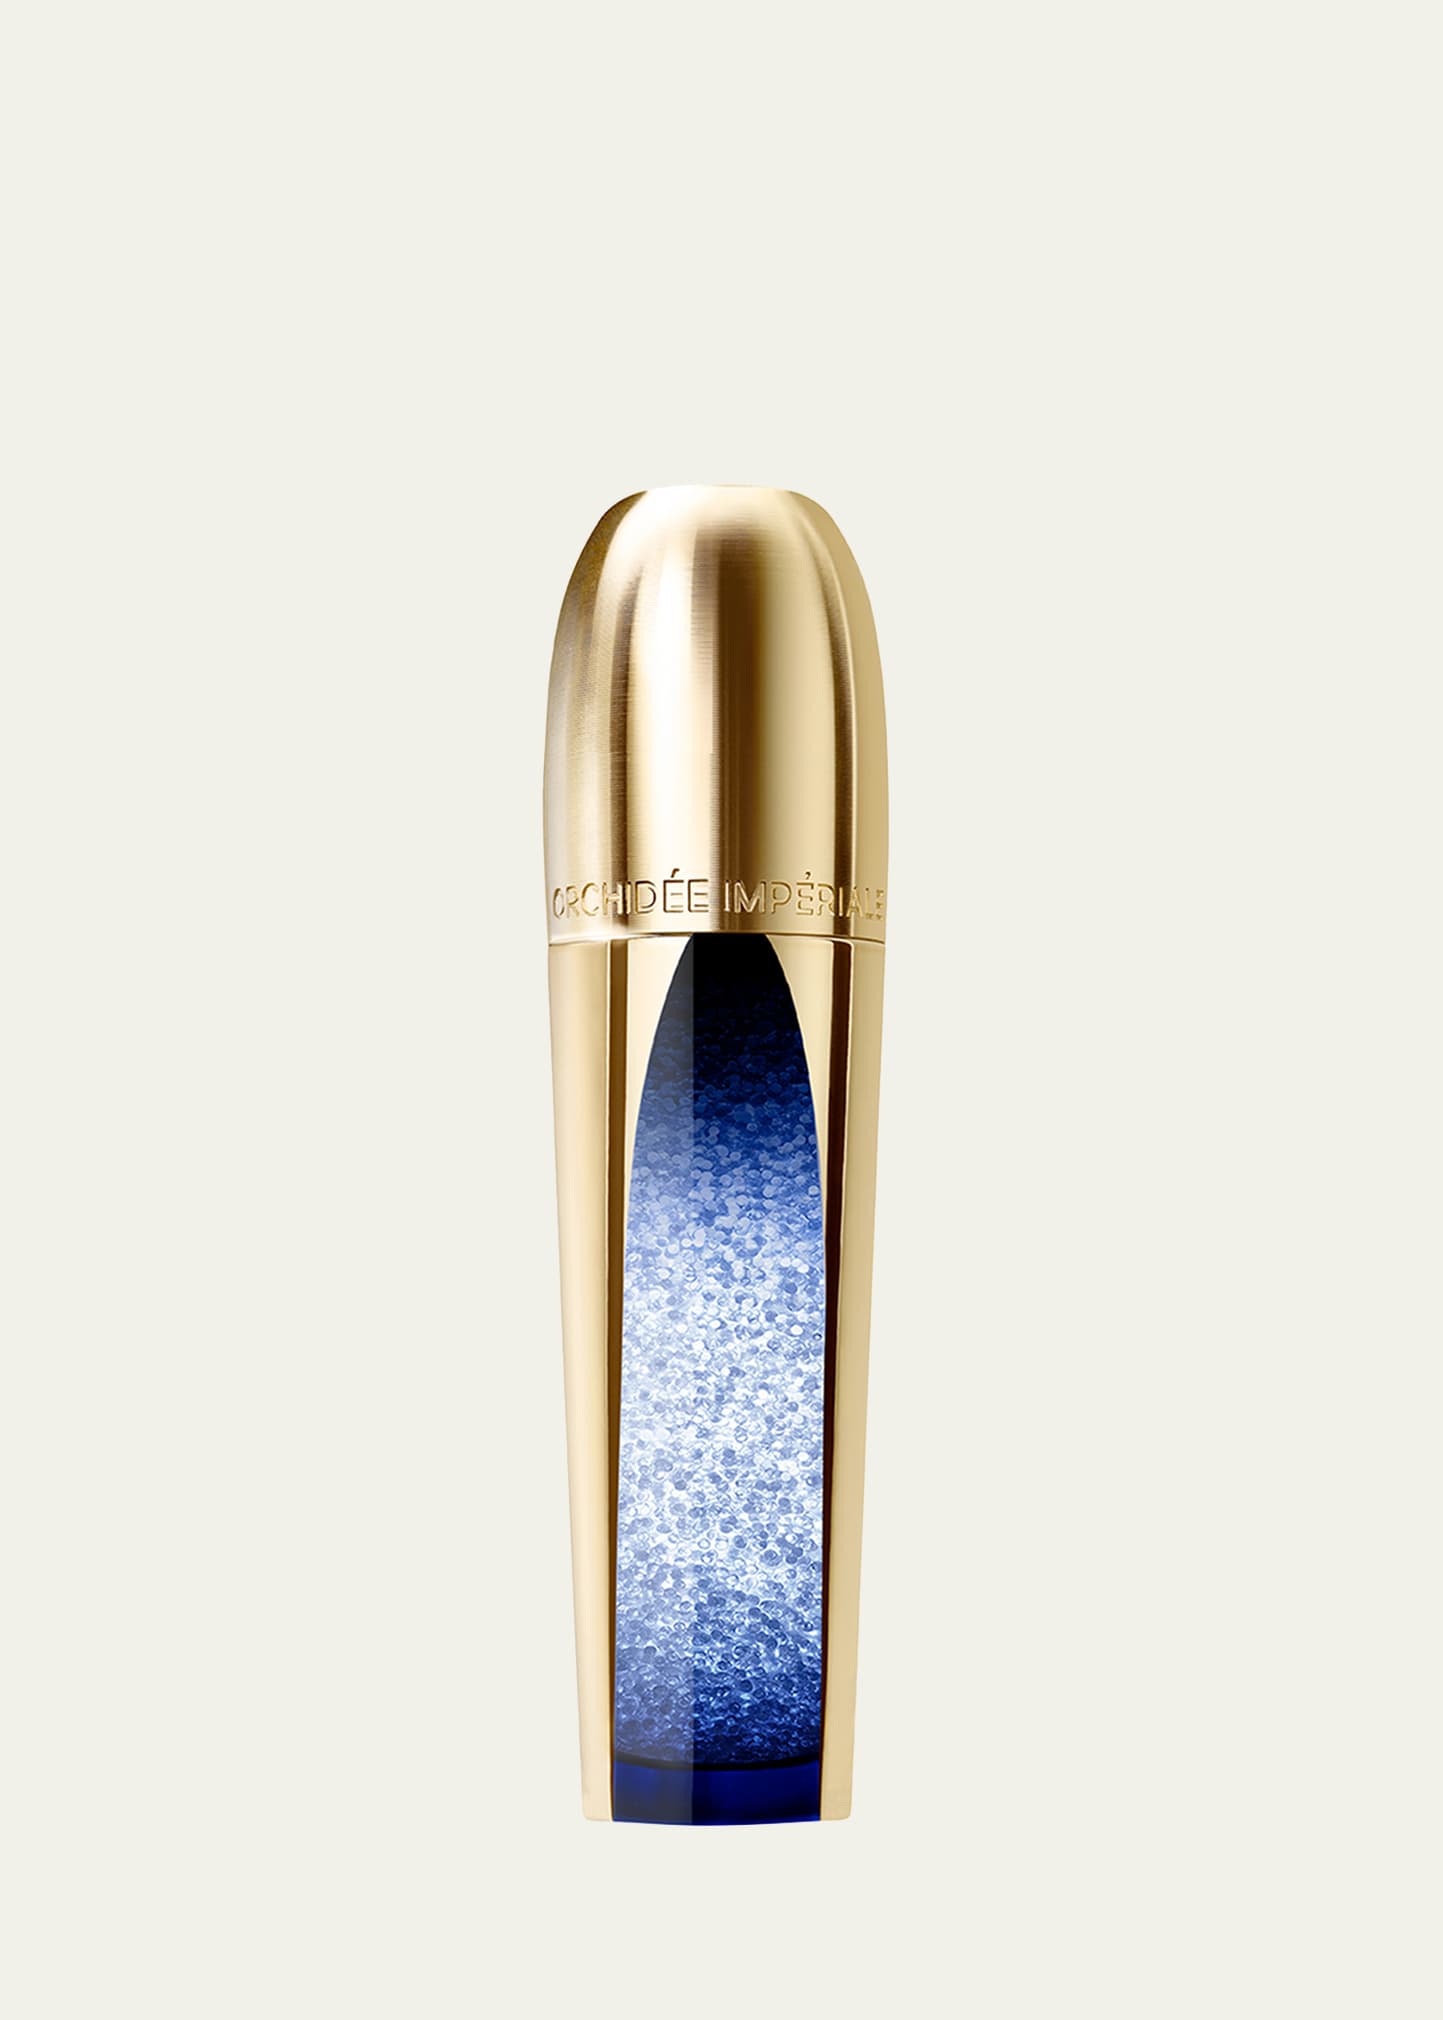 Orchidee Imperiale Micro-Lift Concentrate Serum, 1 oz.